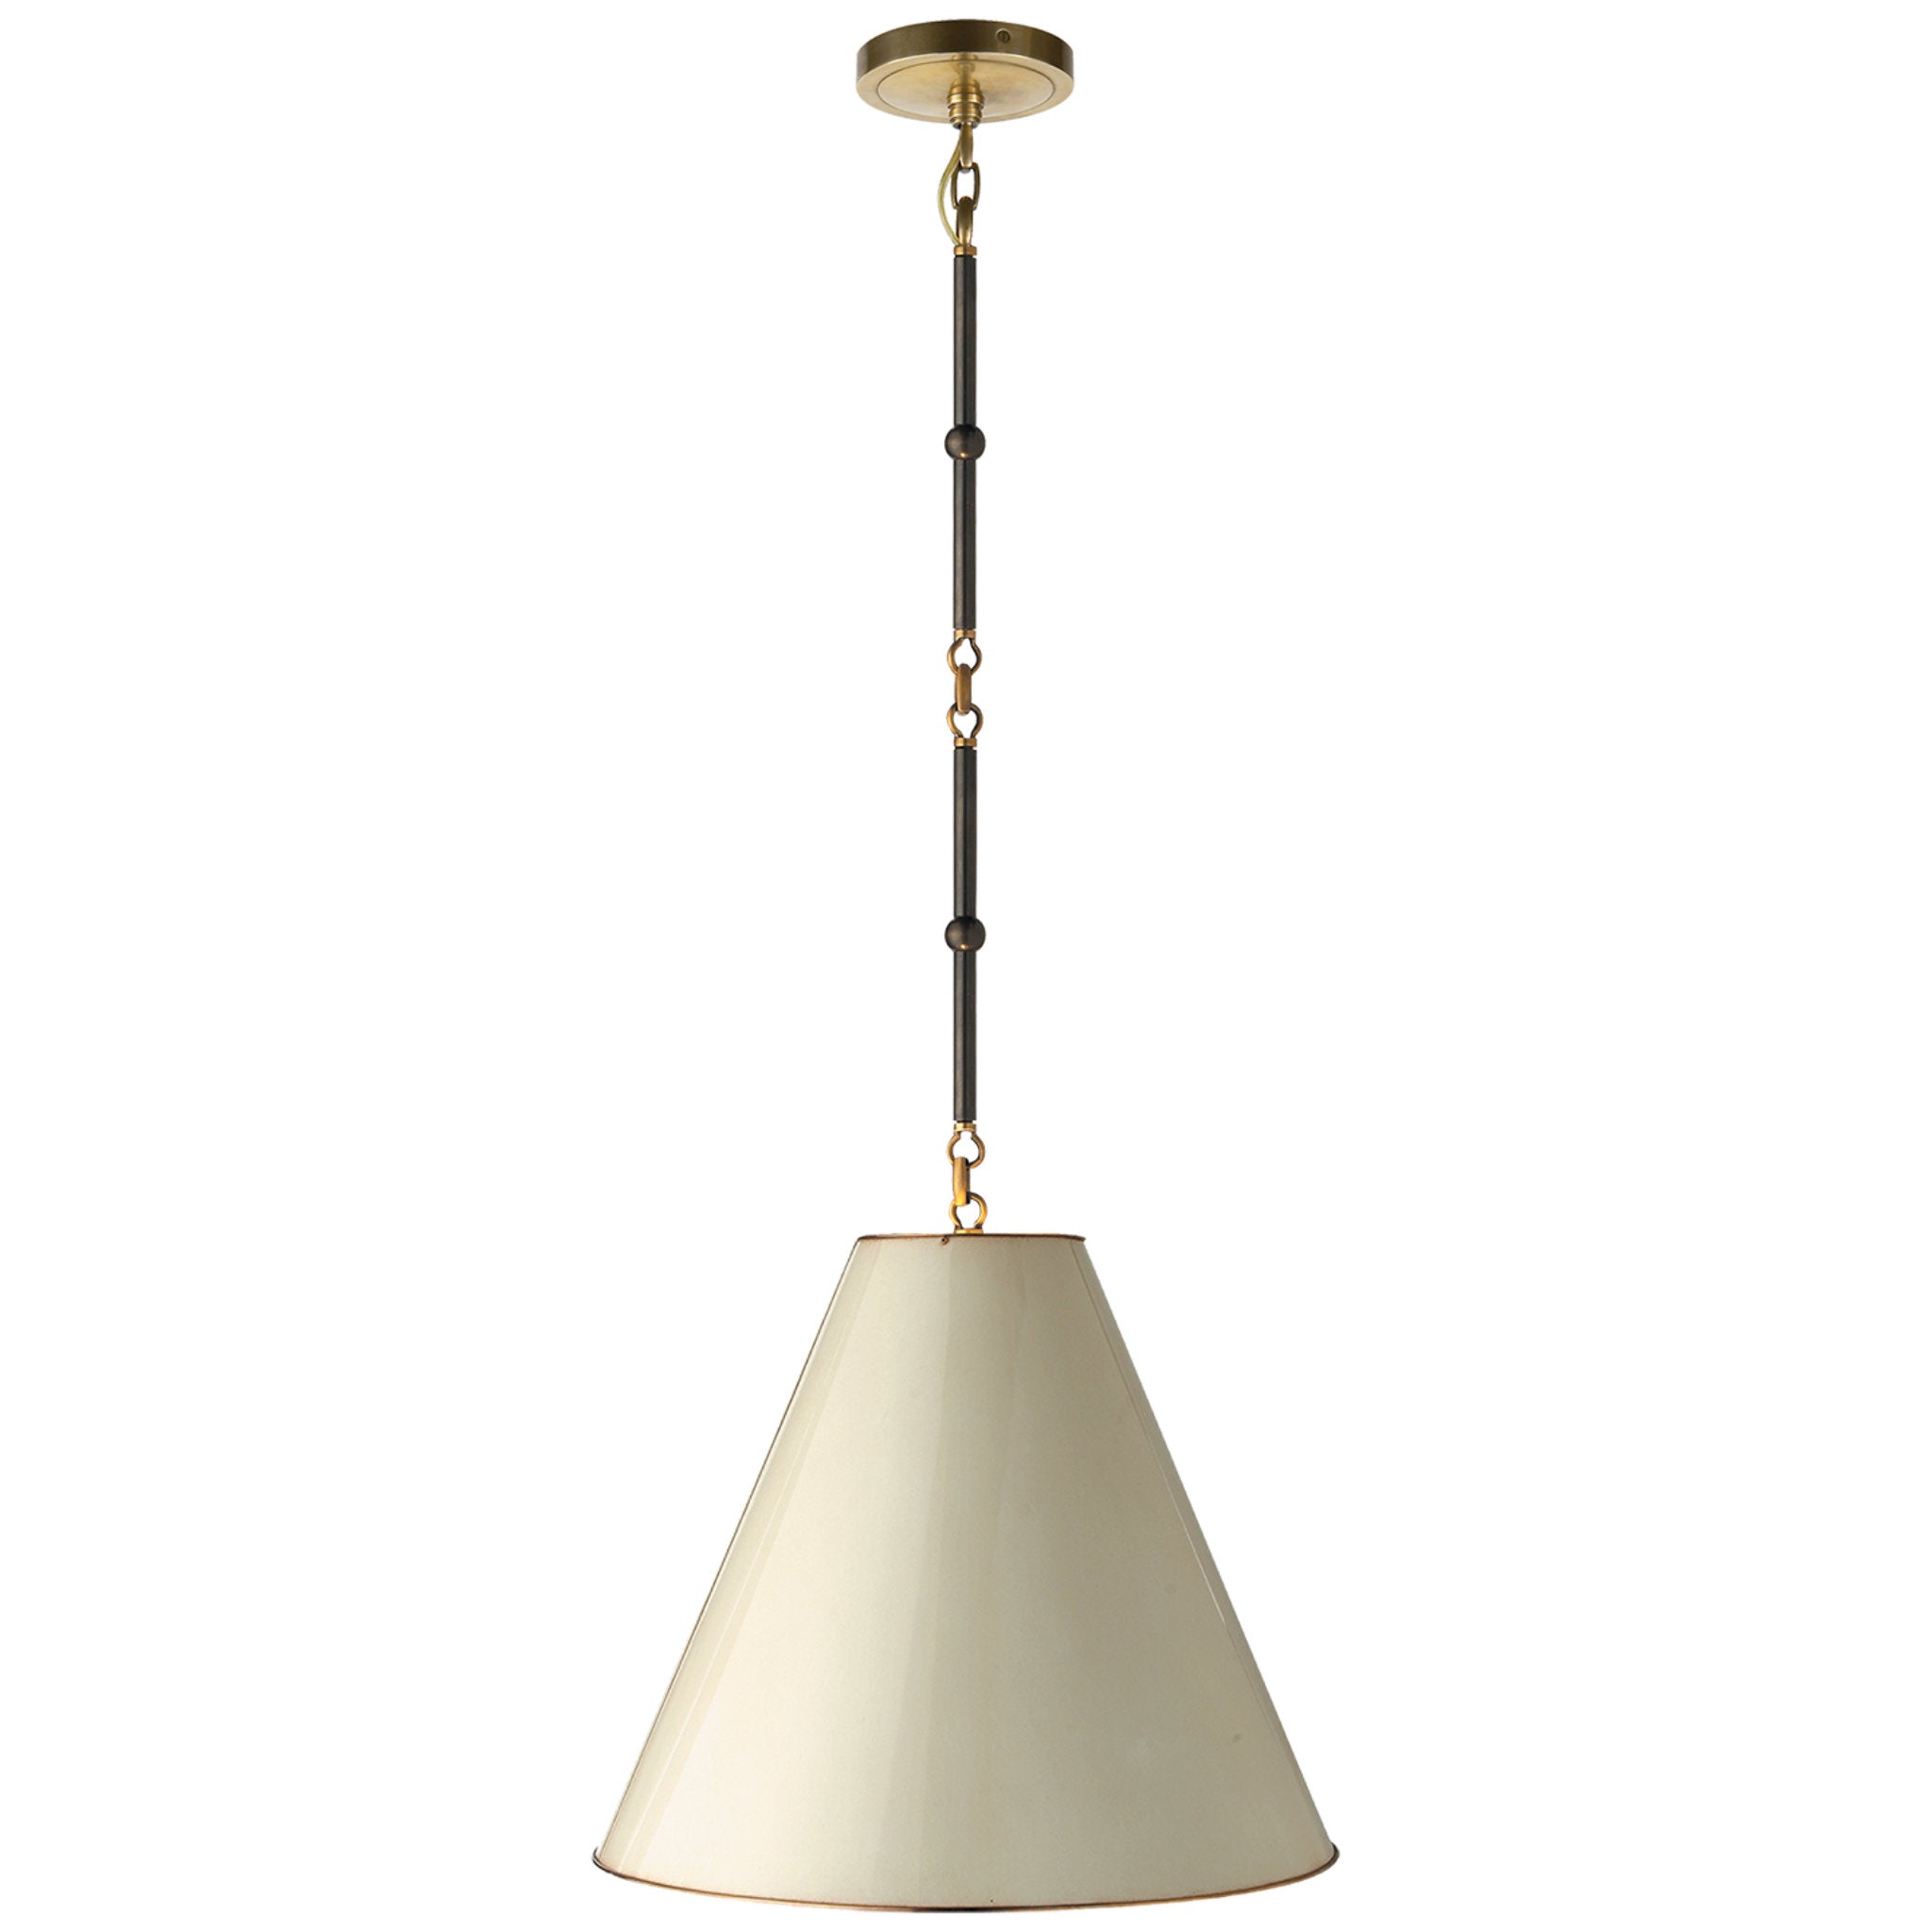 Thomas O'Brien Goodman Small Hanging Light in Bronze and Hand-Rubbed Antique Brass with Antique White Shade